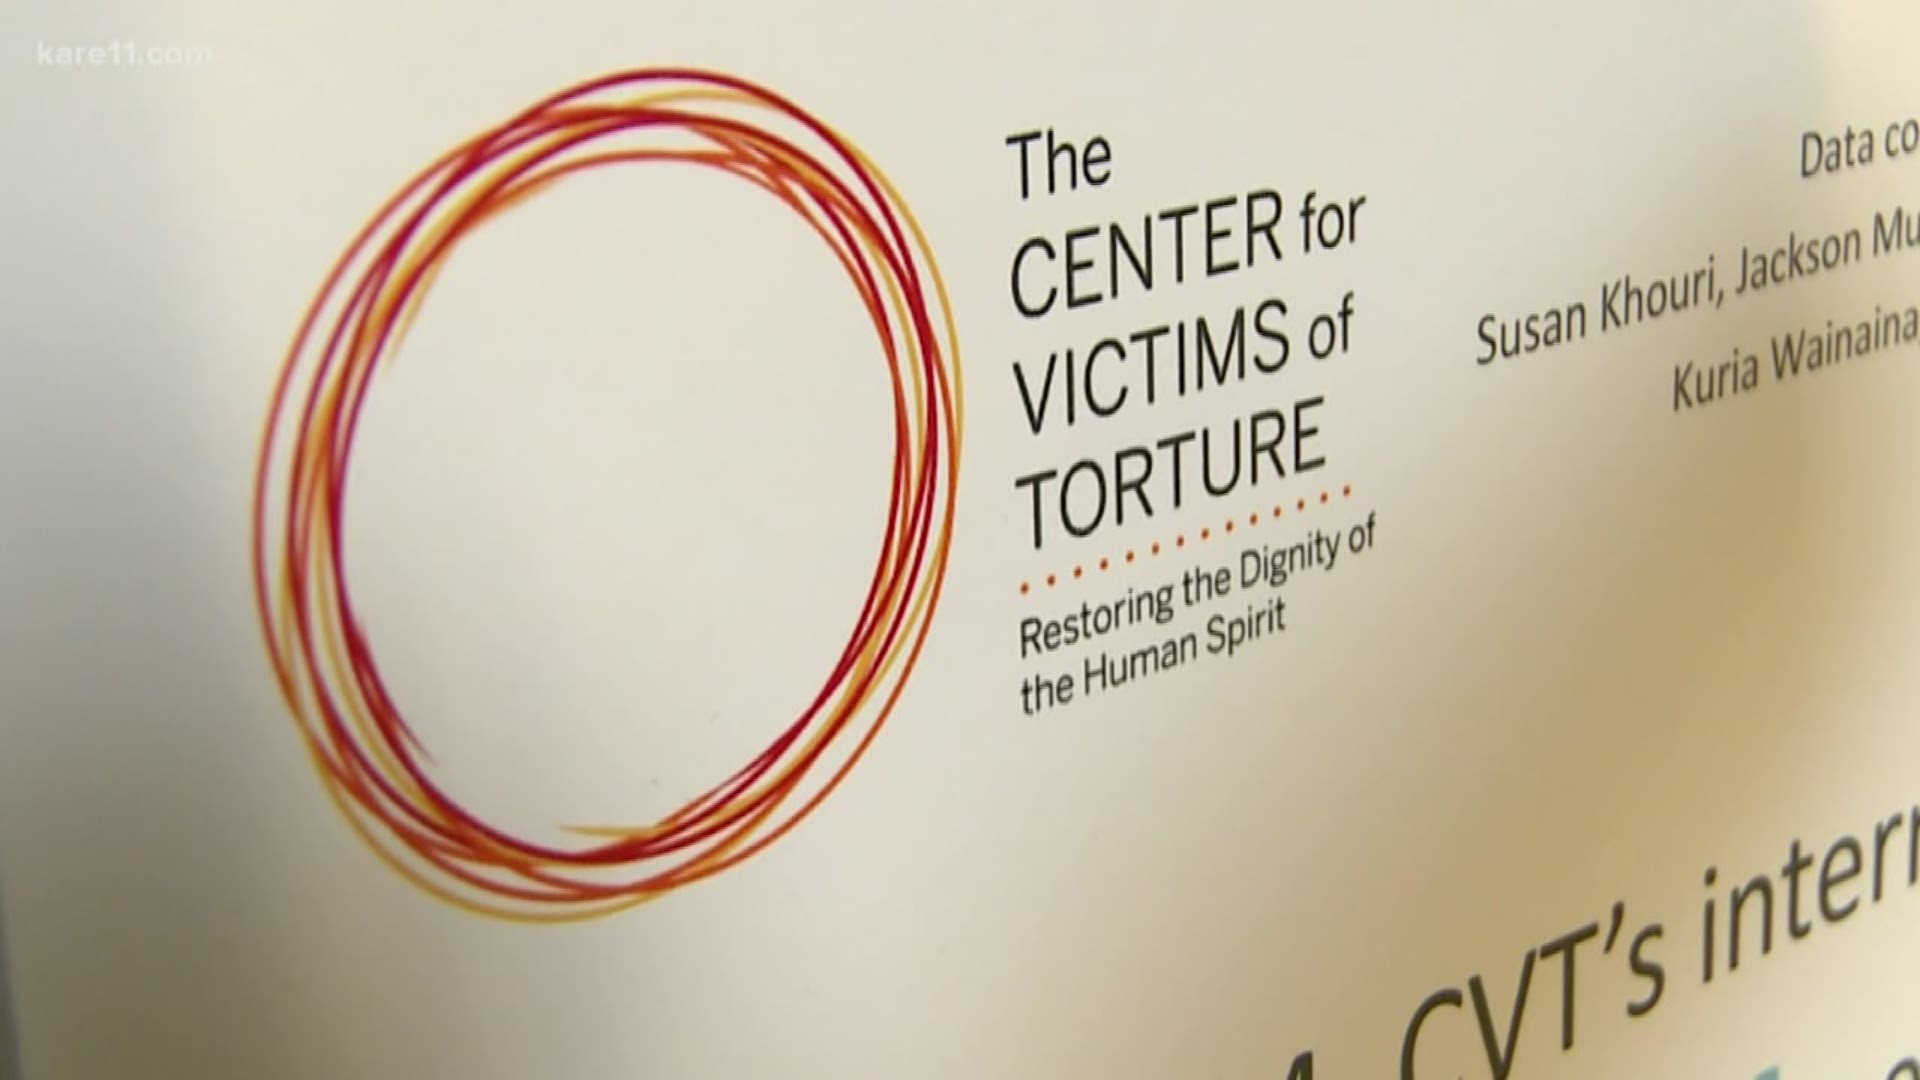 The film tackles the issue of torture and a local center in St. Paul is one of the world's best when it comes to helping victims.